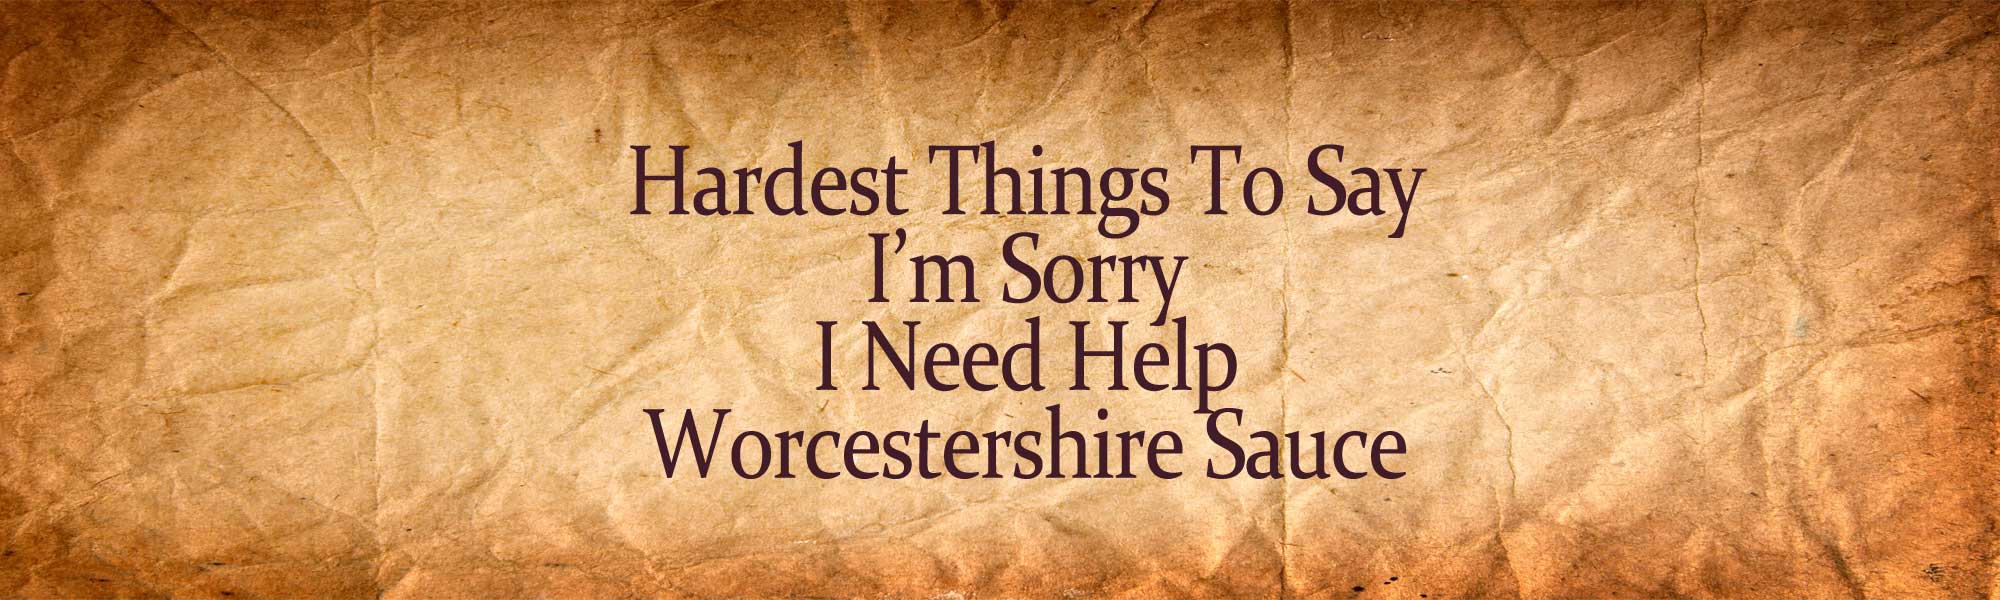 WiscoMary Worcester-Sauce Hardest Things To Say